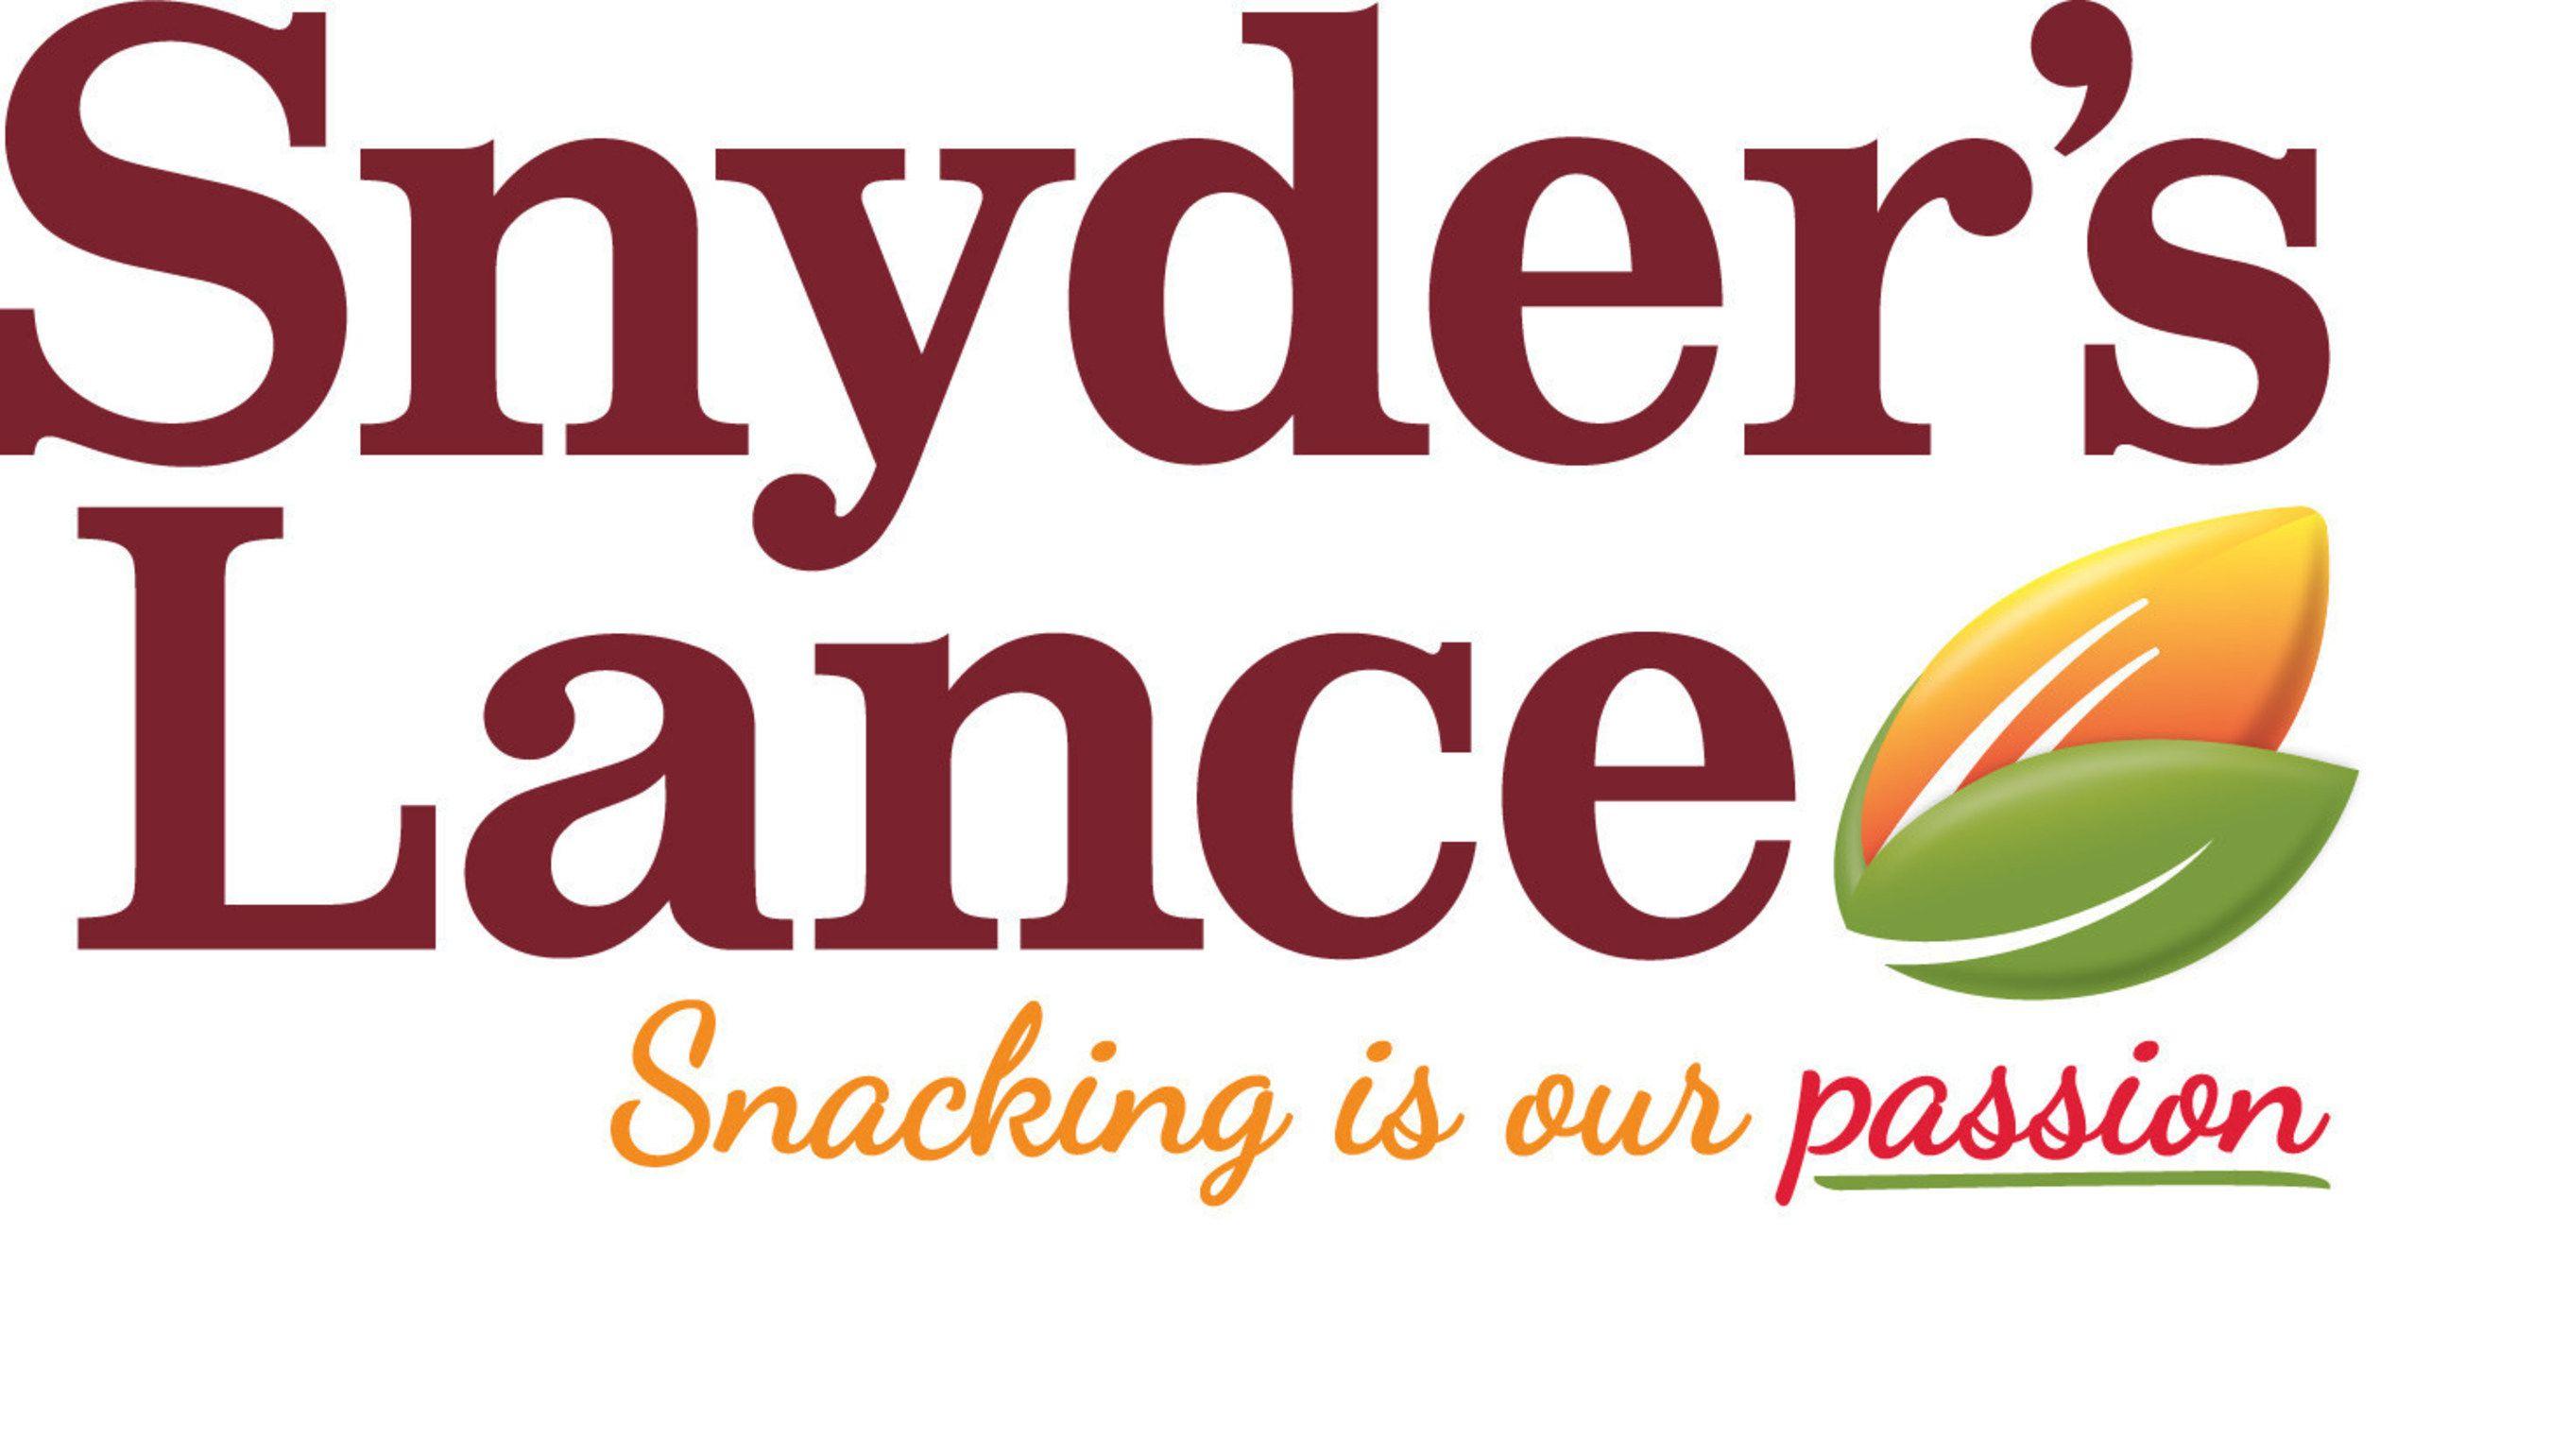 Orange and Red Corporate Logo - Snyder's-Lance, Inc. introduces a new corporate logo reinforcing its ...